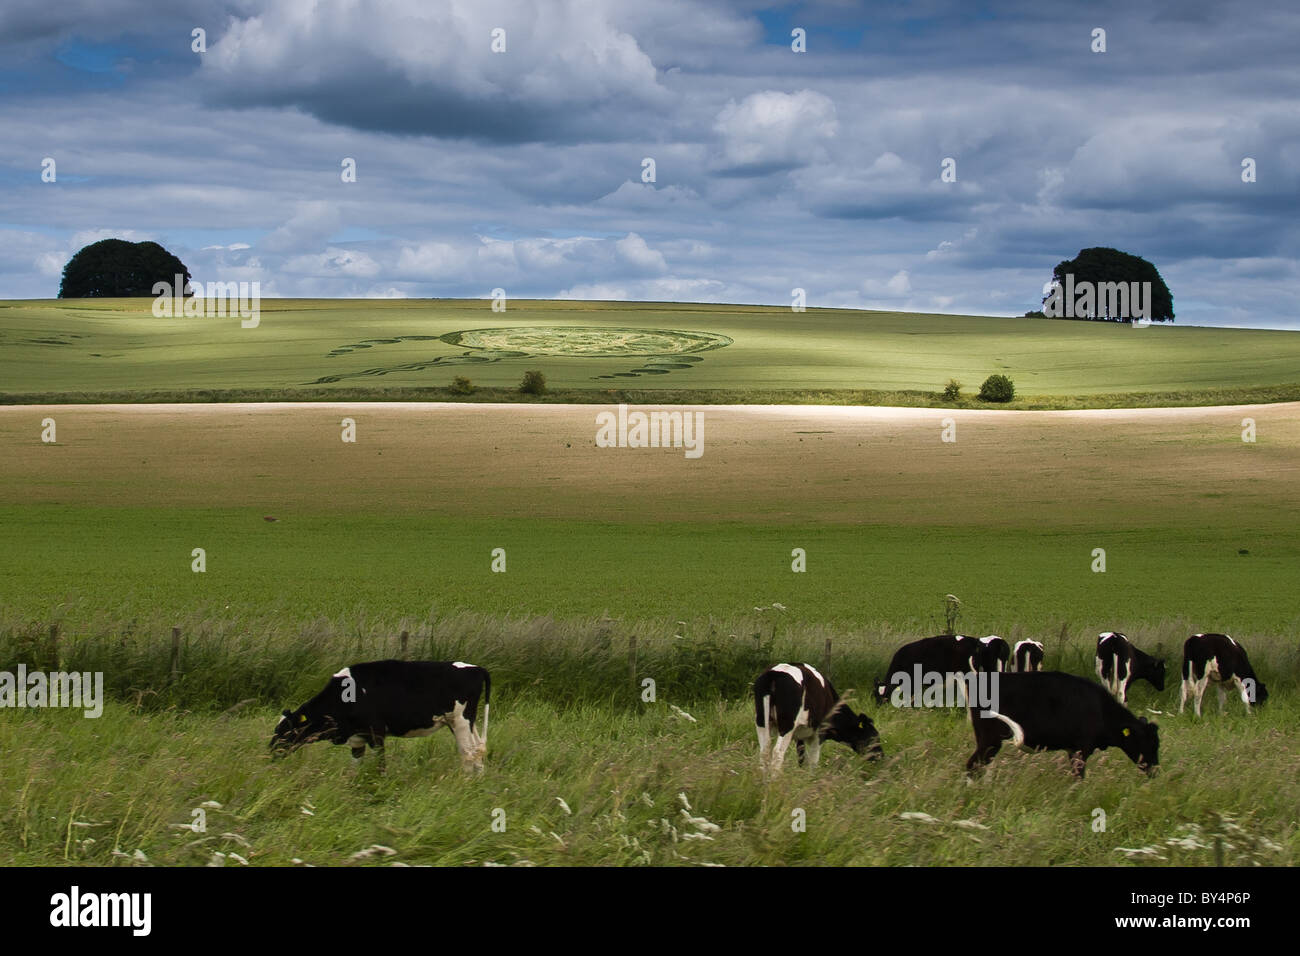 Cows graze in grass in the foreground. In the background is a crop circle of a jellyfish-like shape, on a Wiltshire wheat field Stock Photo